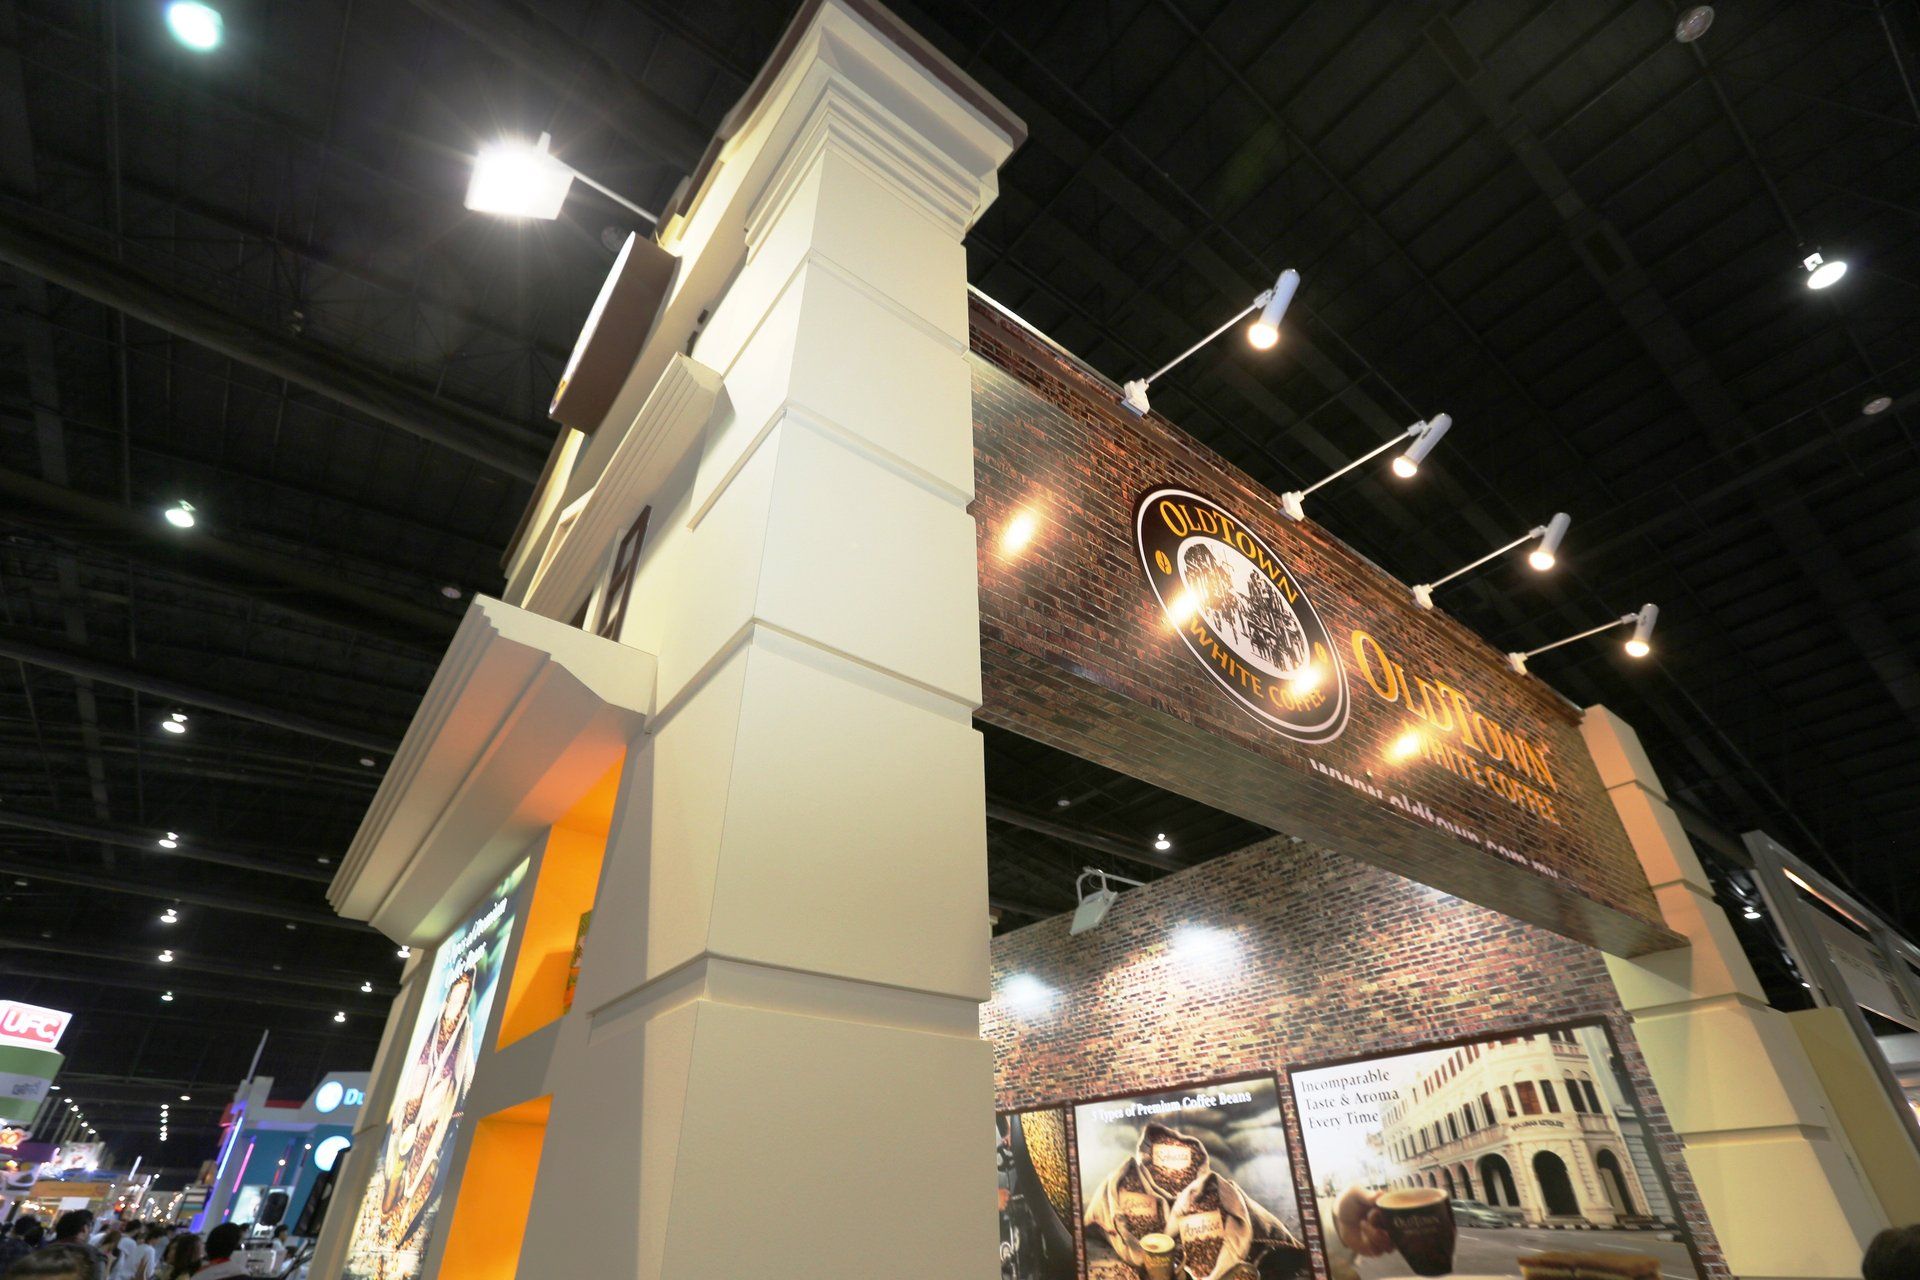 Oldtown Coffee @ Thaifex 2015. Booth designed and built by Essential Global Fairs.